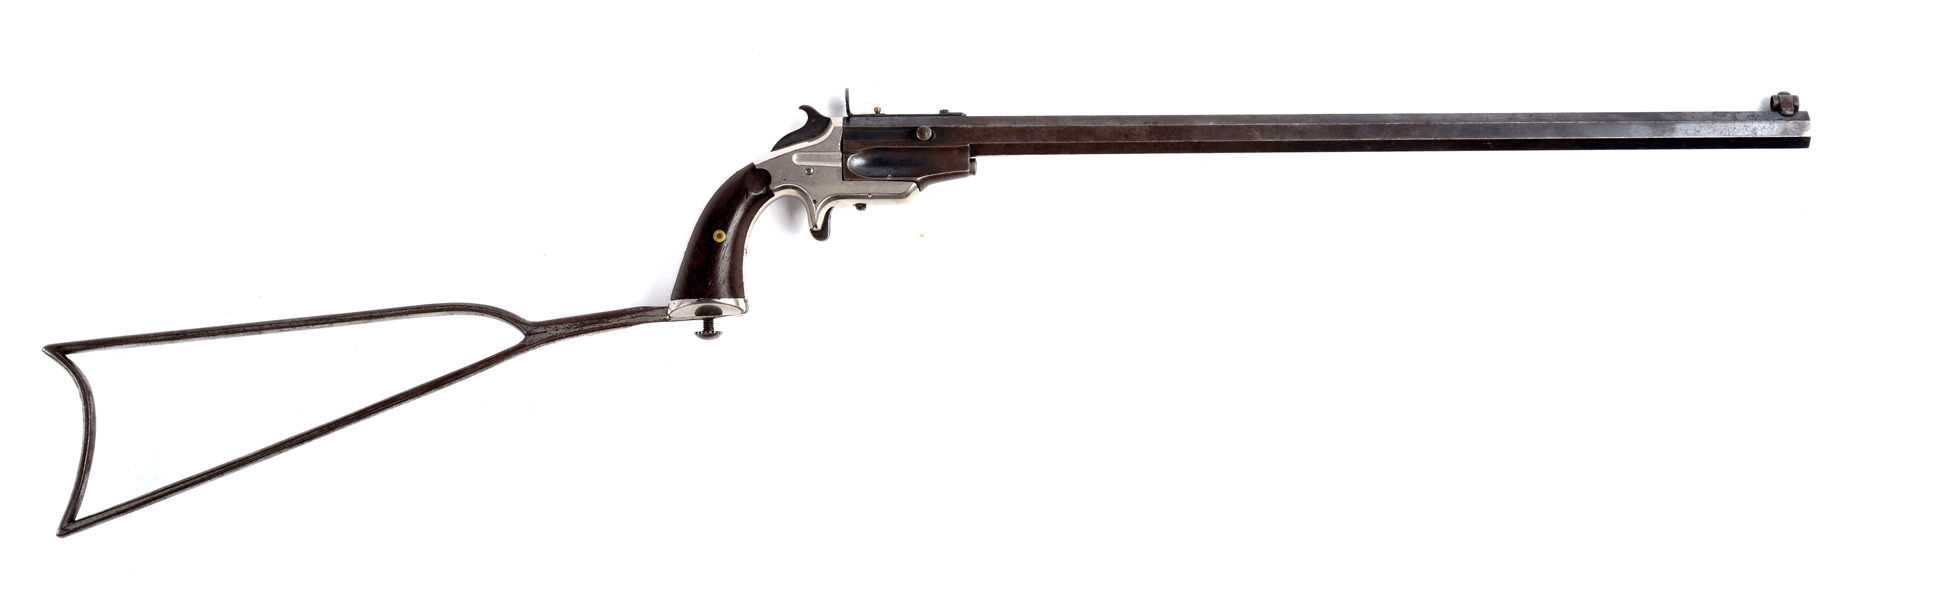 (A) FRANK WESSON MODEL 1870 POCKET RIFLE WITH STOCK.